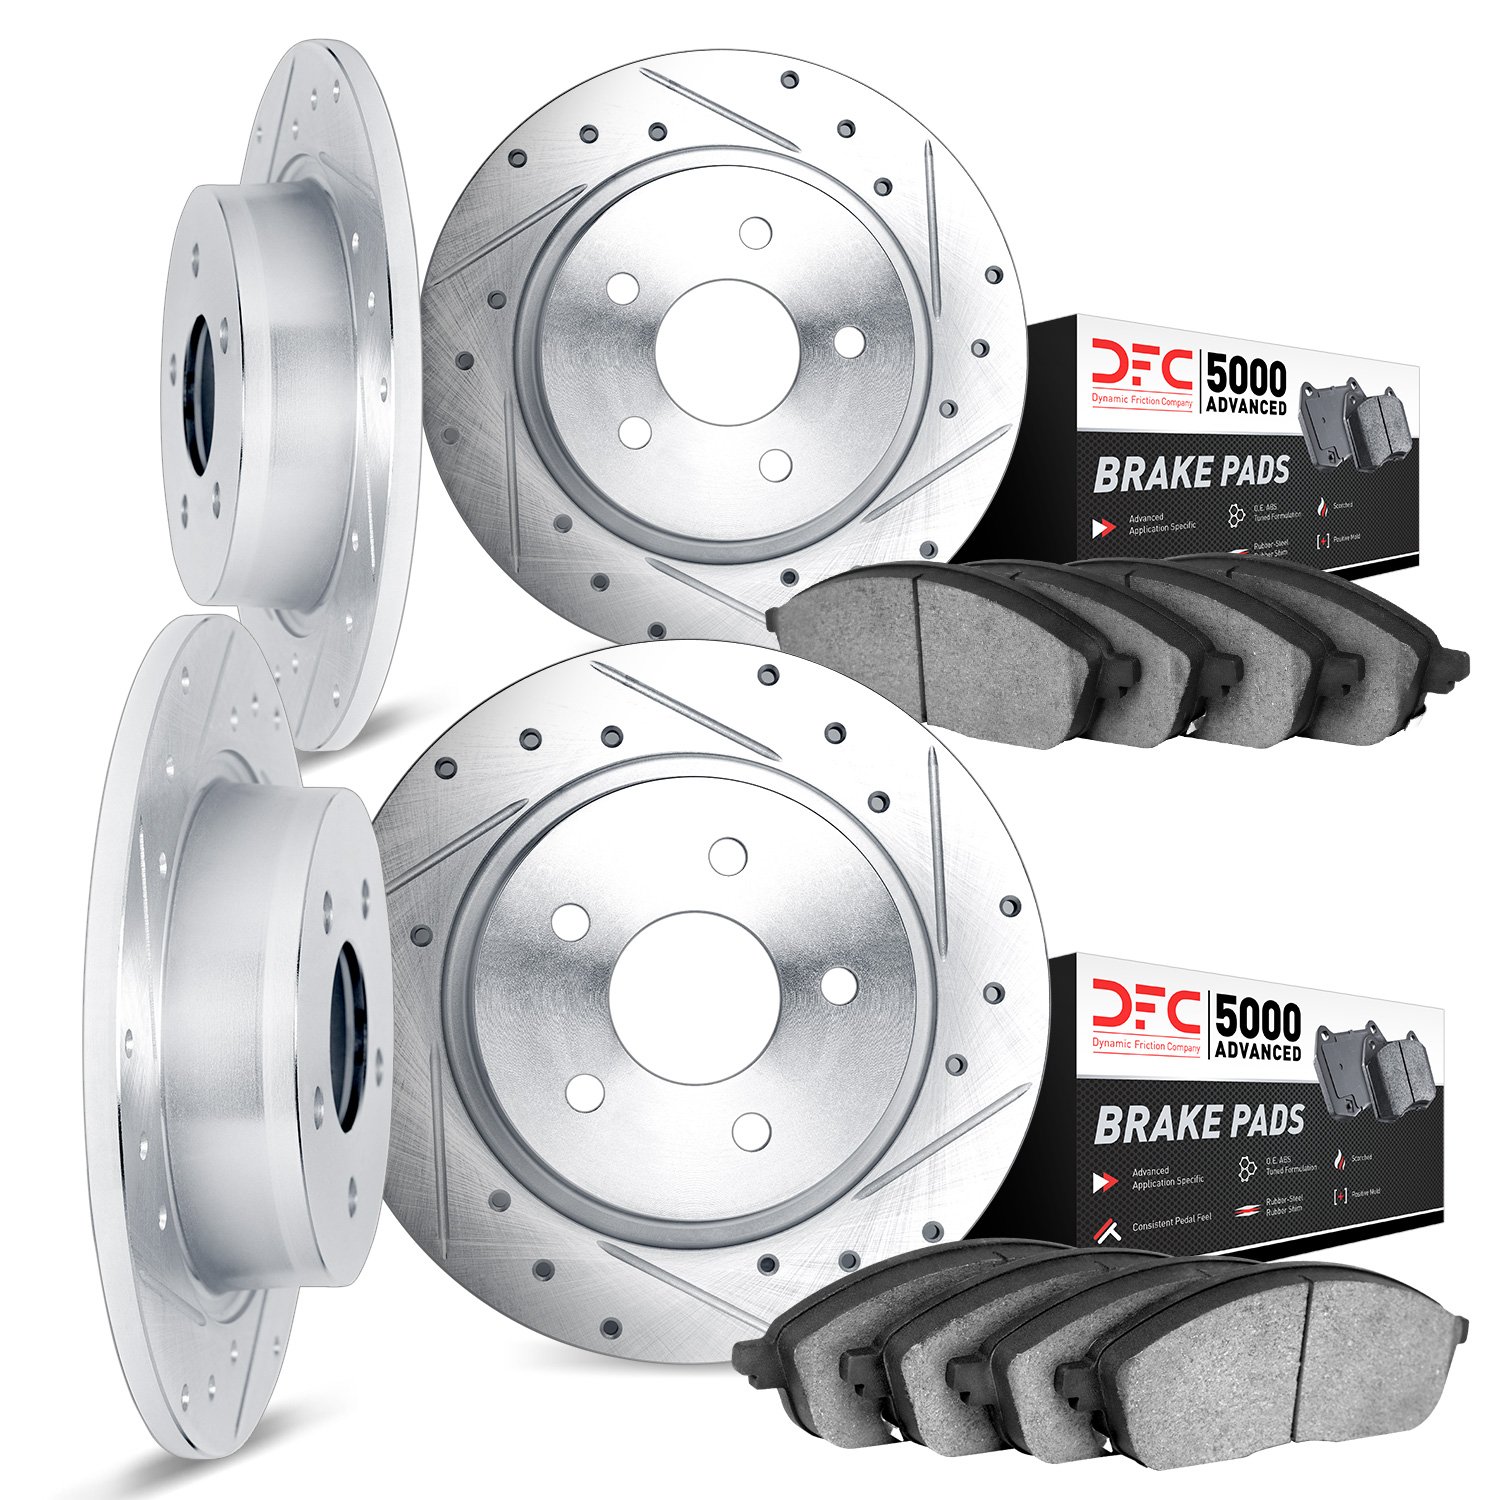 7504-11001 Drilled/Slotted Brake Rotors w/5000 Advanced Brake Pads Kit [Silver], 1994-1999 Land Rover, Position: Front and Rear